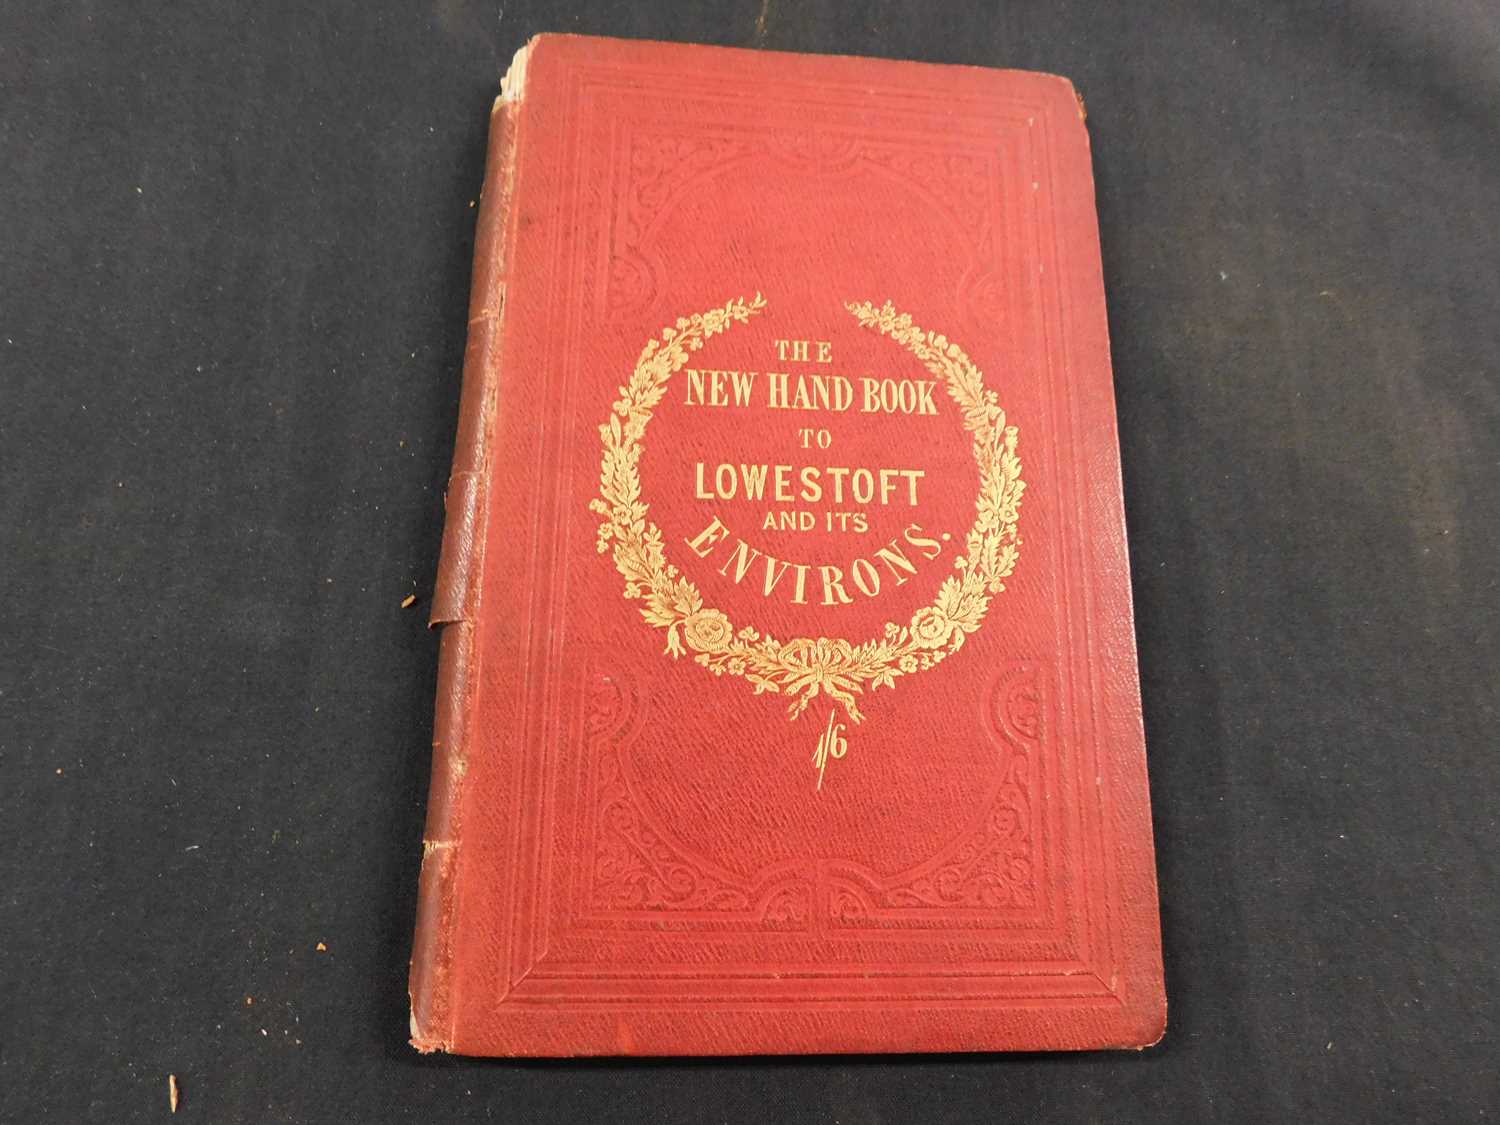 NEW HAND-BOOK TO LOWESTOFT AND ITS ENVIRONS, Lowestoft, printed by T Crowe, 1849, first edition, 4